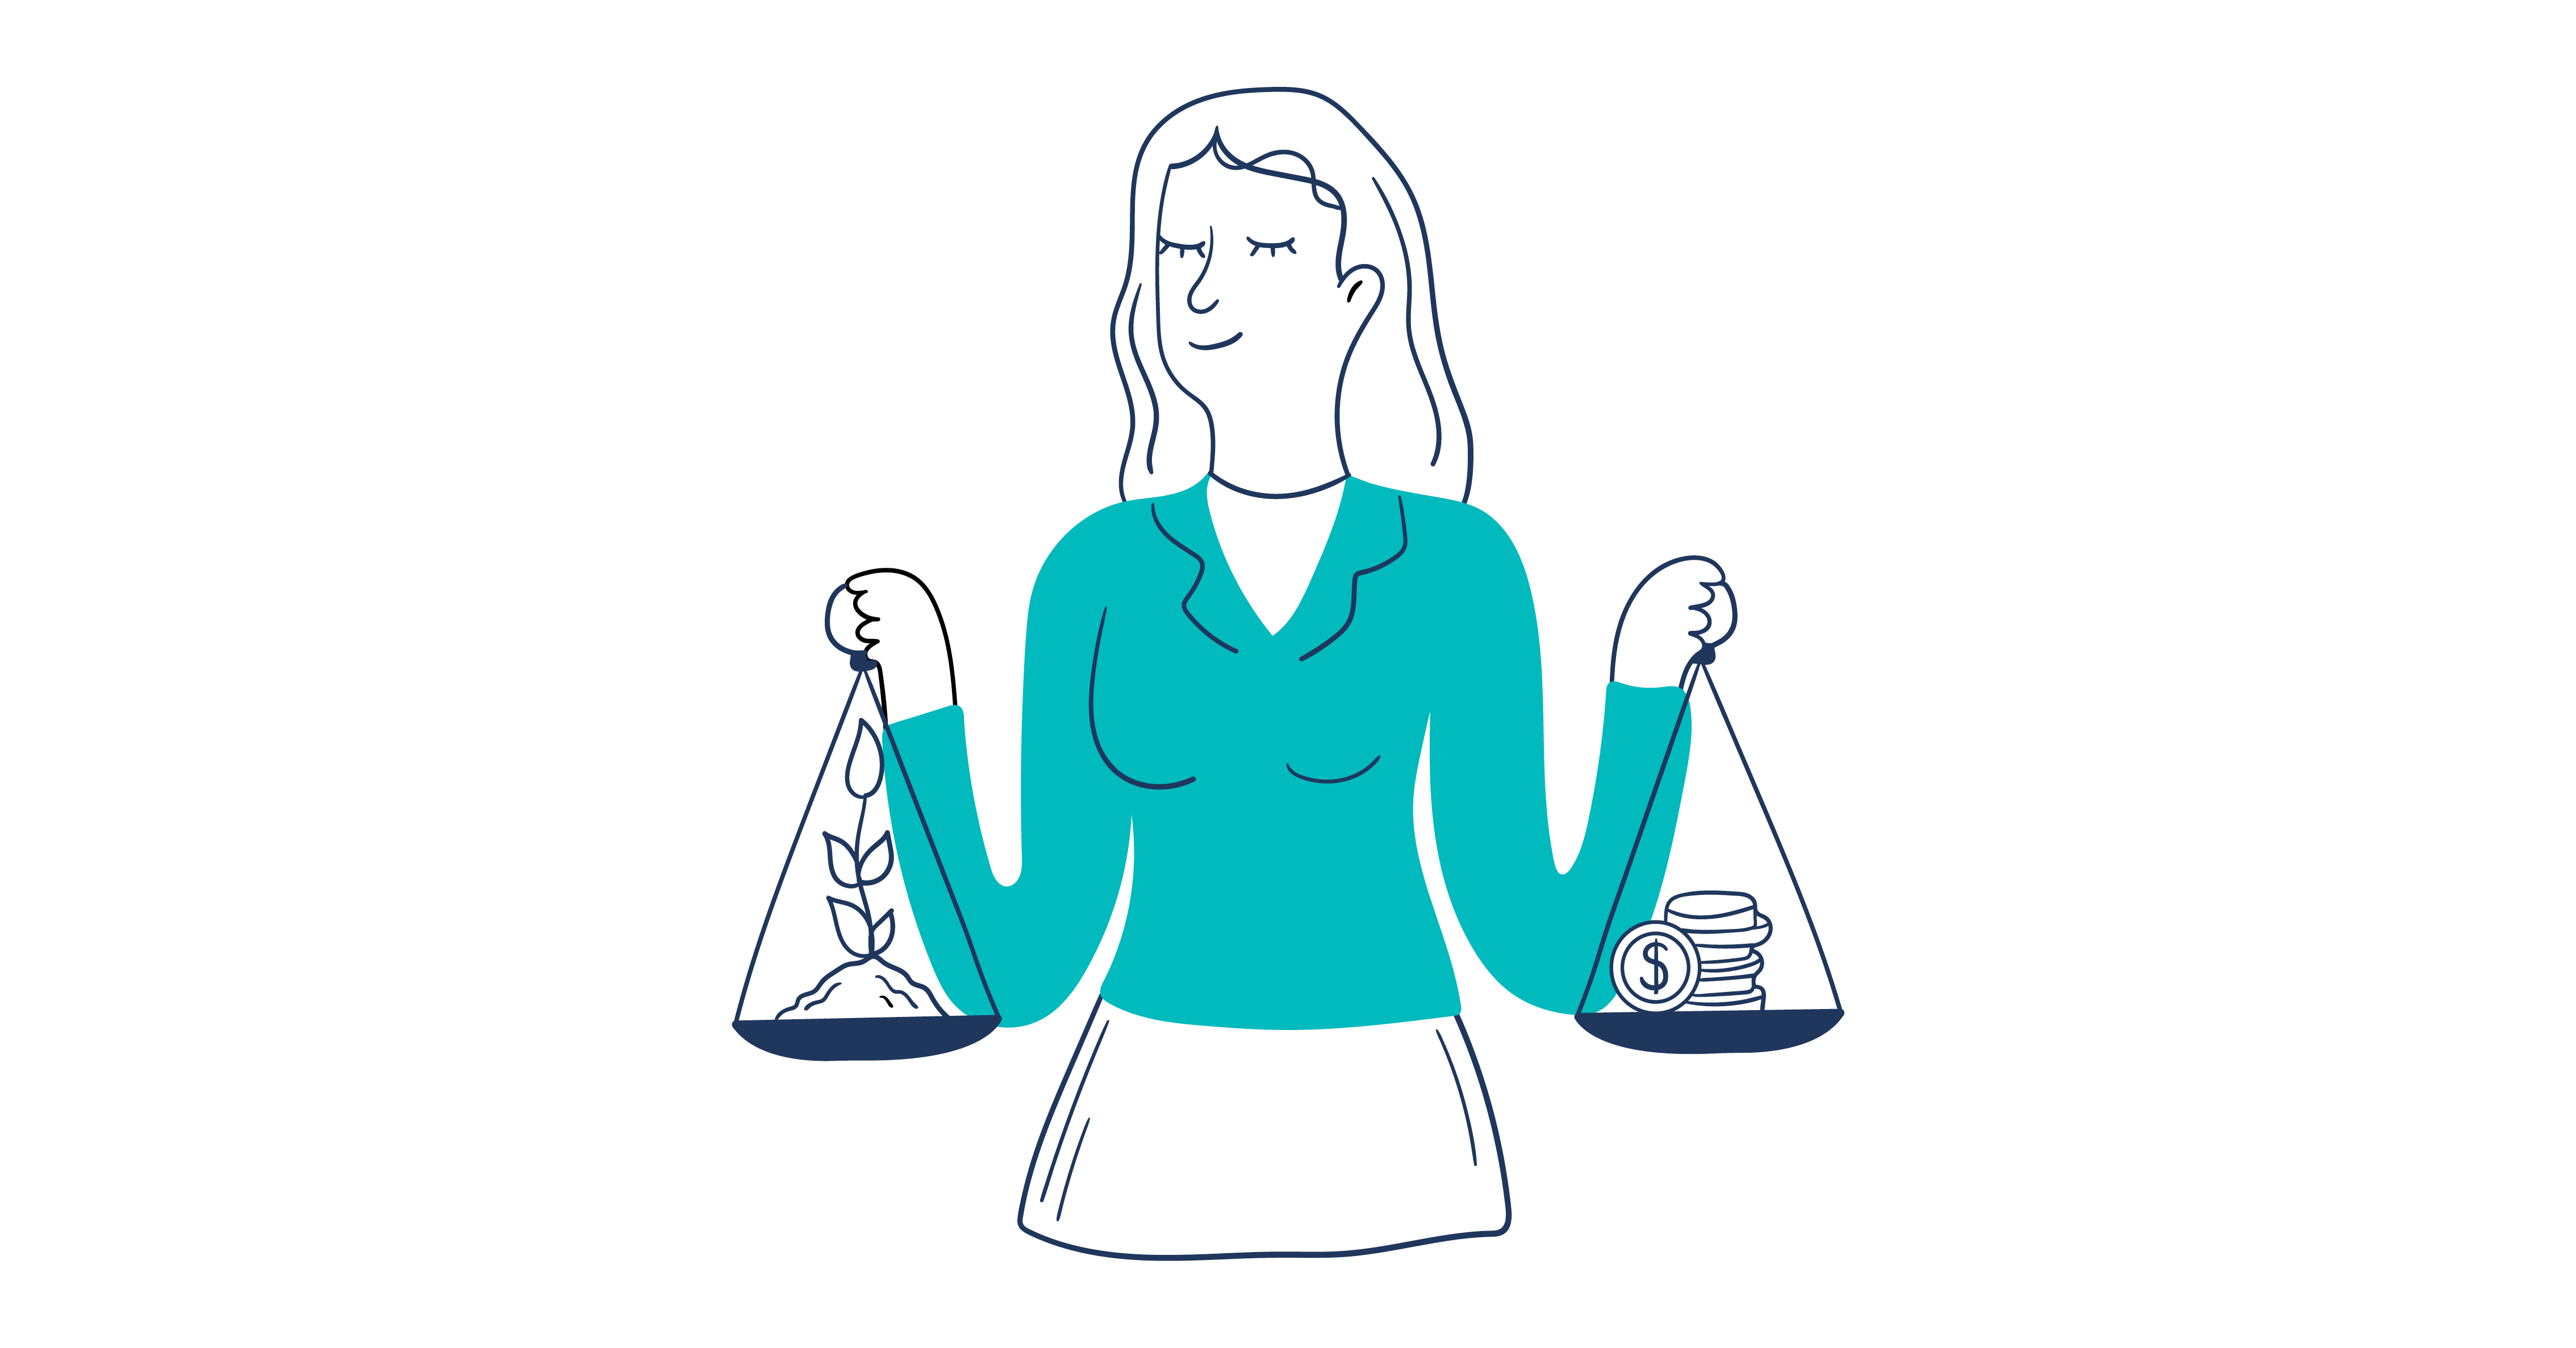 Illustration of a smiling woman balancing a scale with a plant in her left hand, and a scale with money in her right hand.